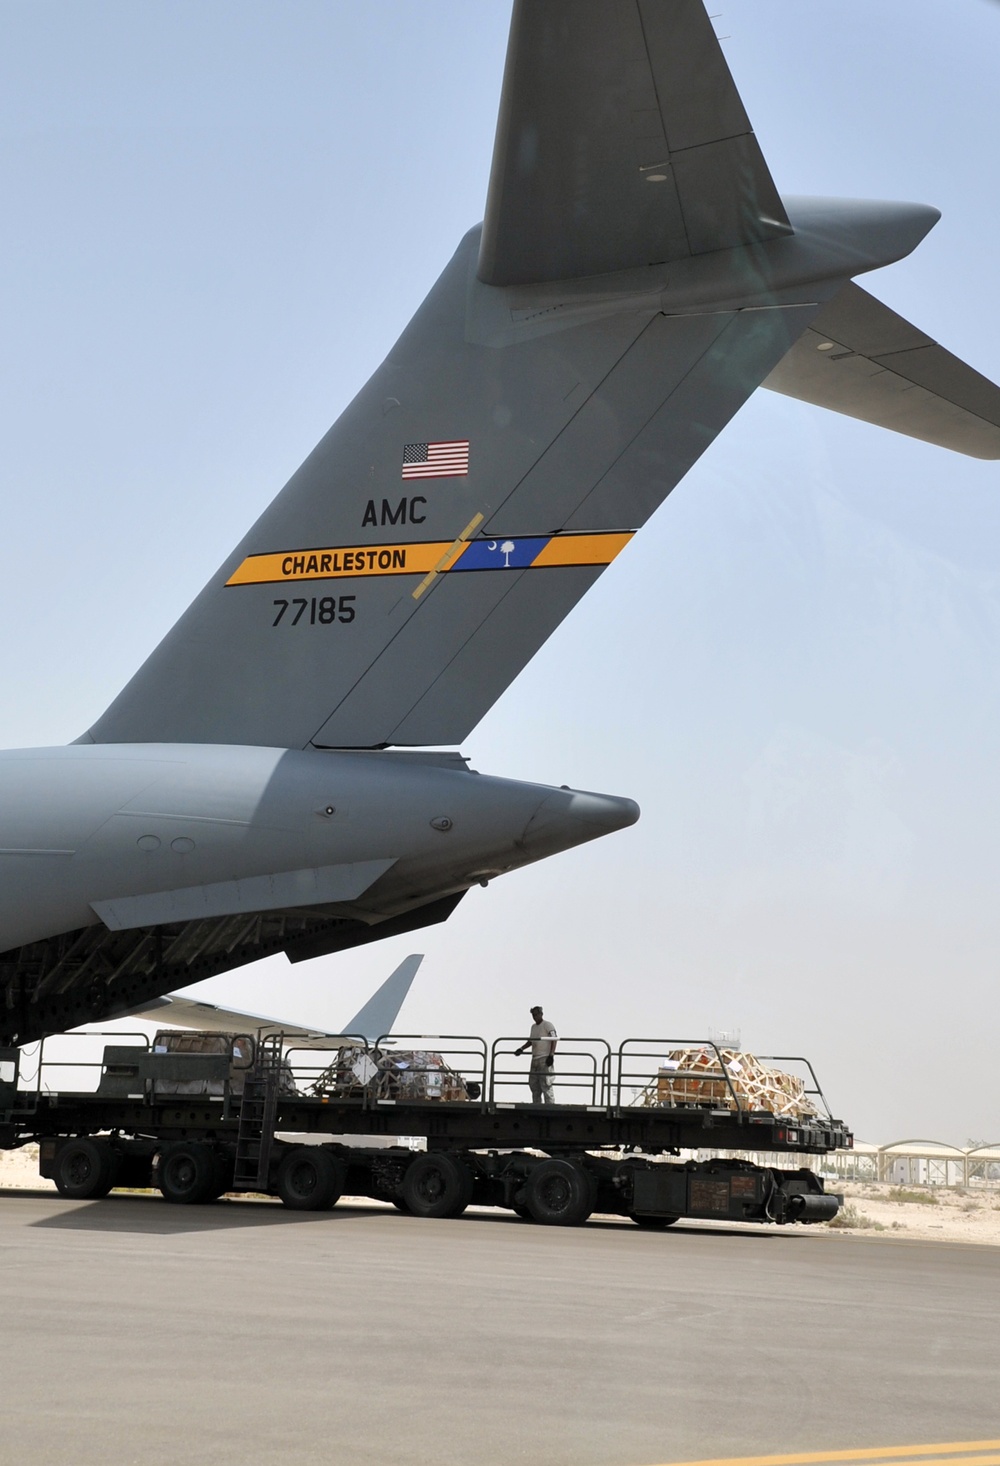 Air Transportation Airmen From the 380th Expeditionary Logistics Readiness Squadron's Air Terminal Operations Center Drives a 60,000-pound-capable Aircraft Loader to Unload a Plane During Operations for the 380th Air Expeditionary Wing at a Non-disclosed